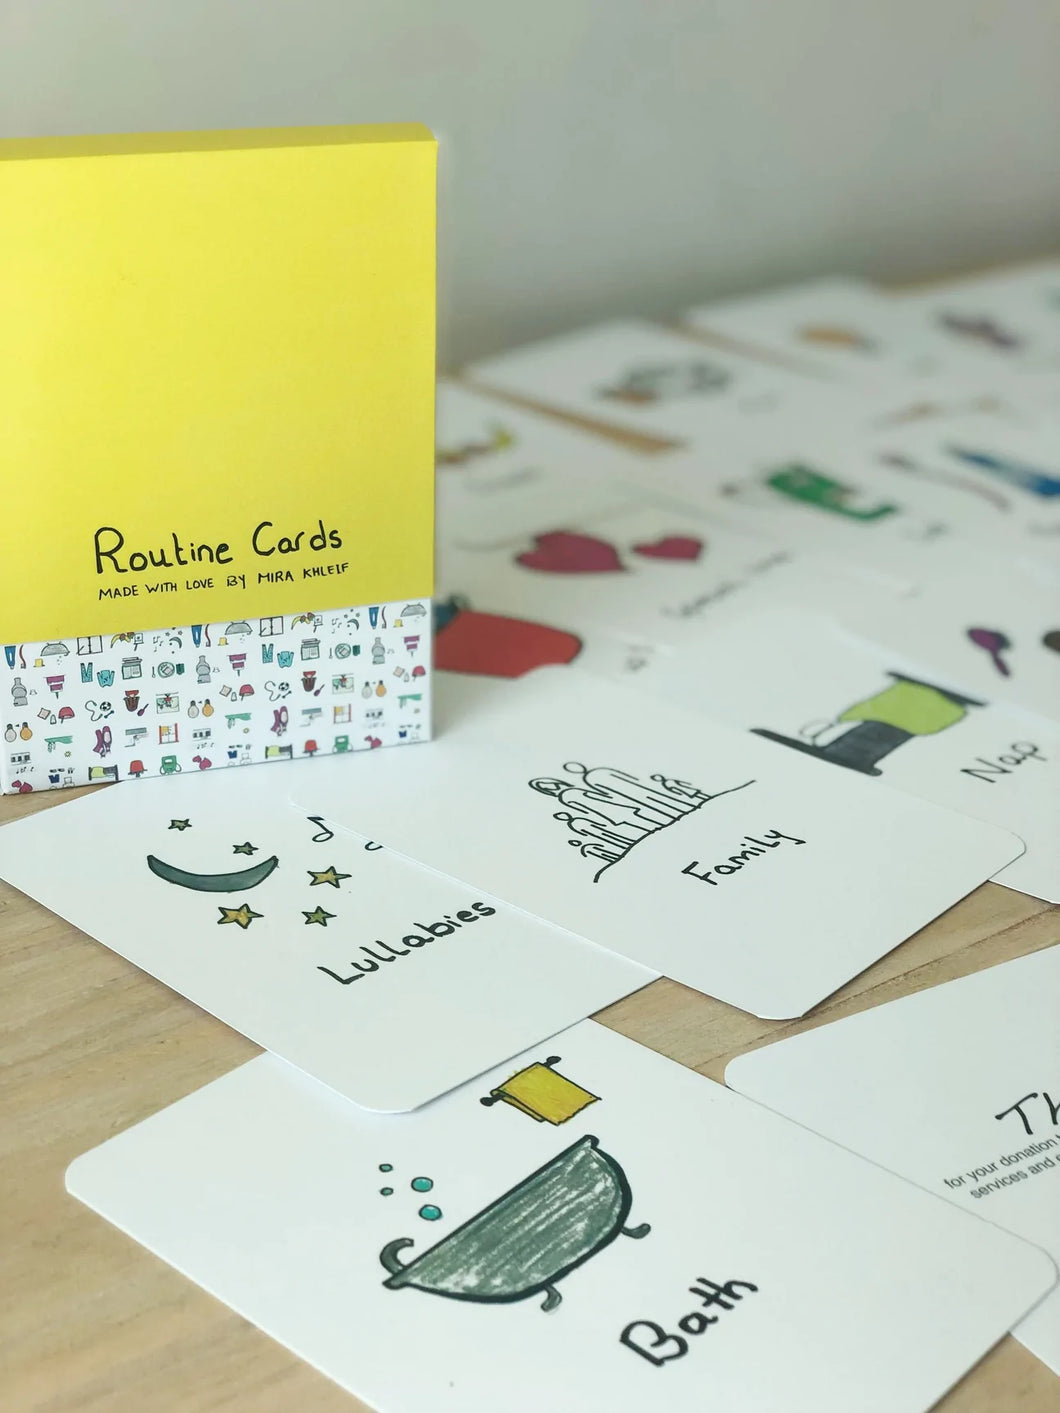 Routine Cards